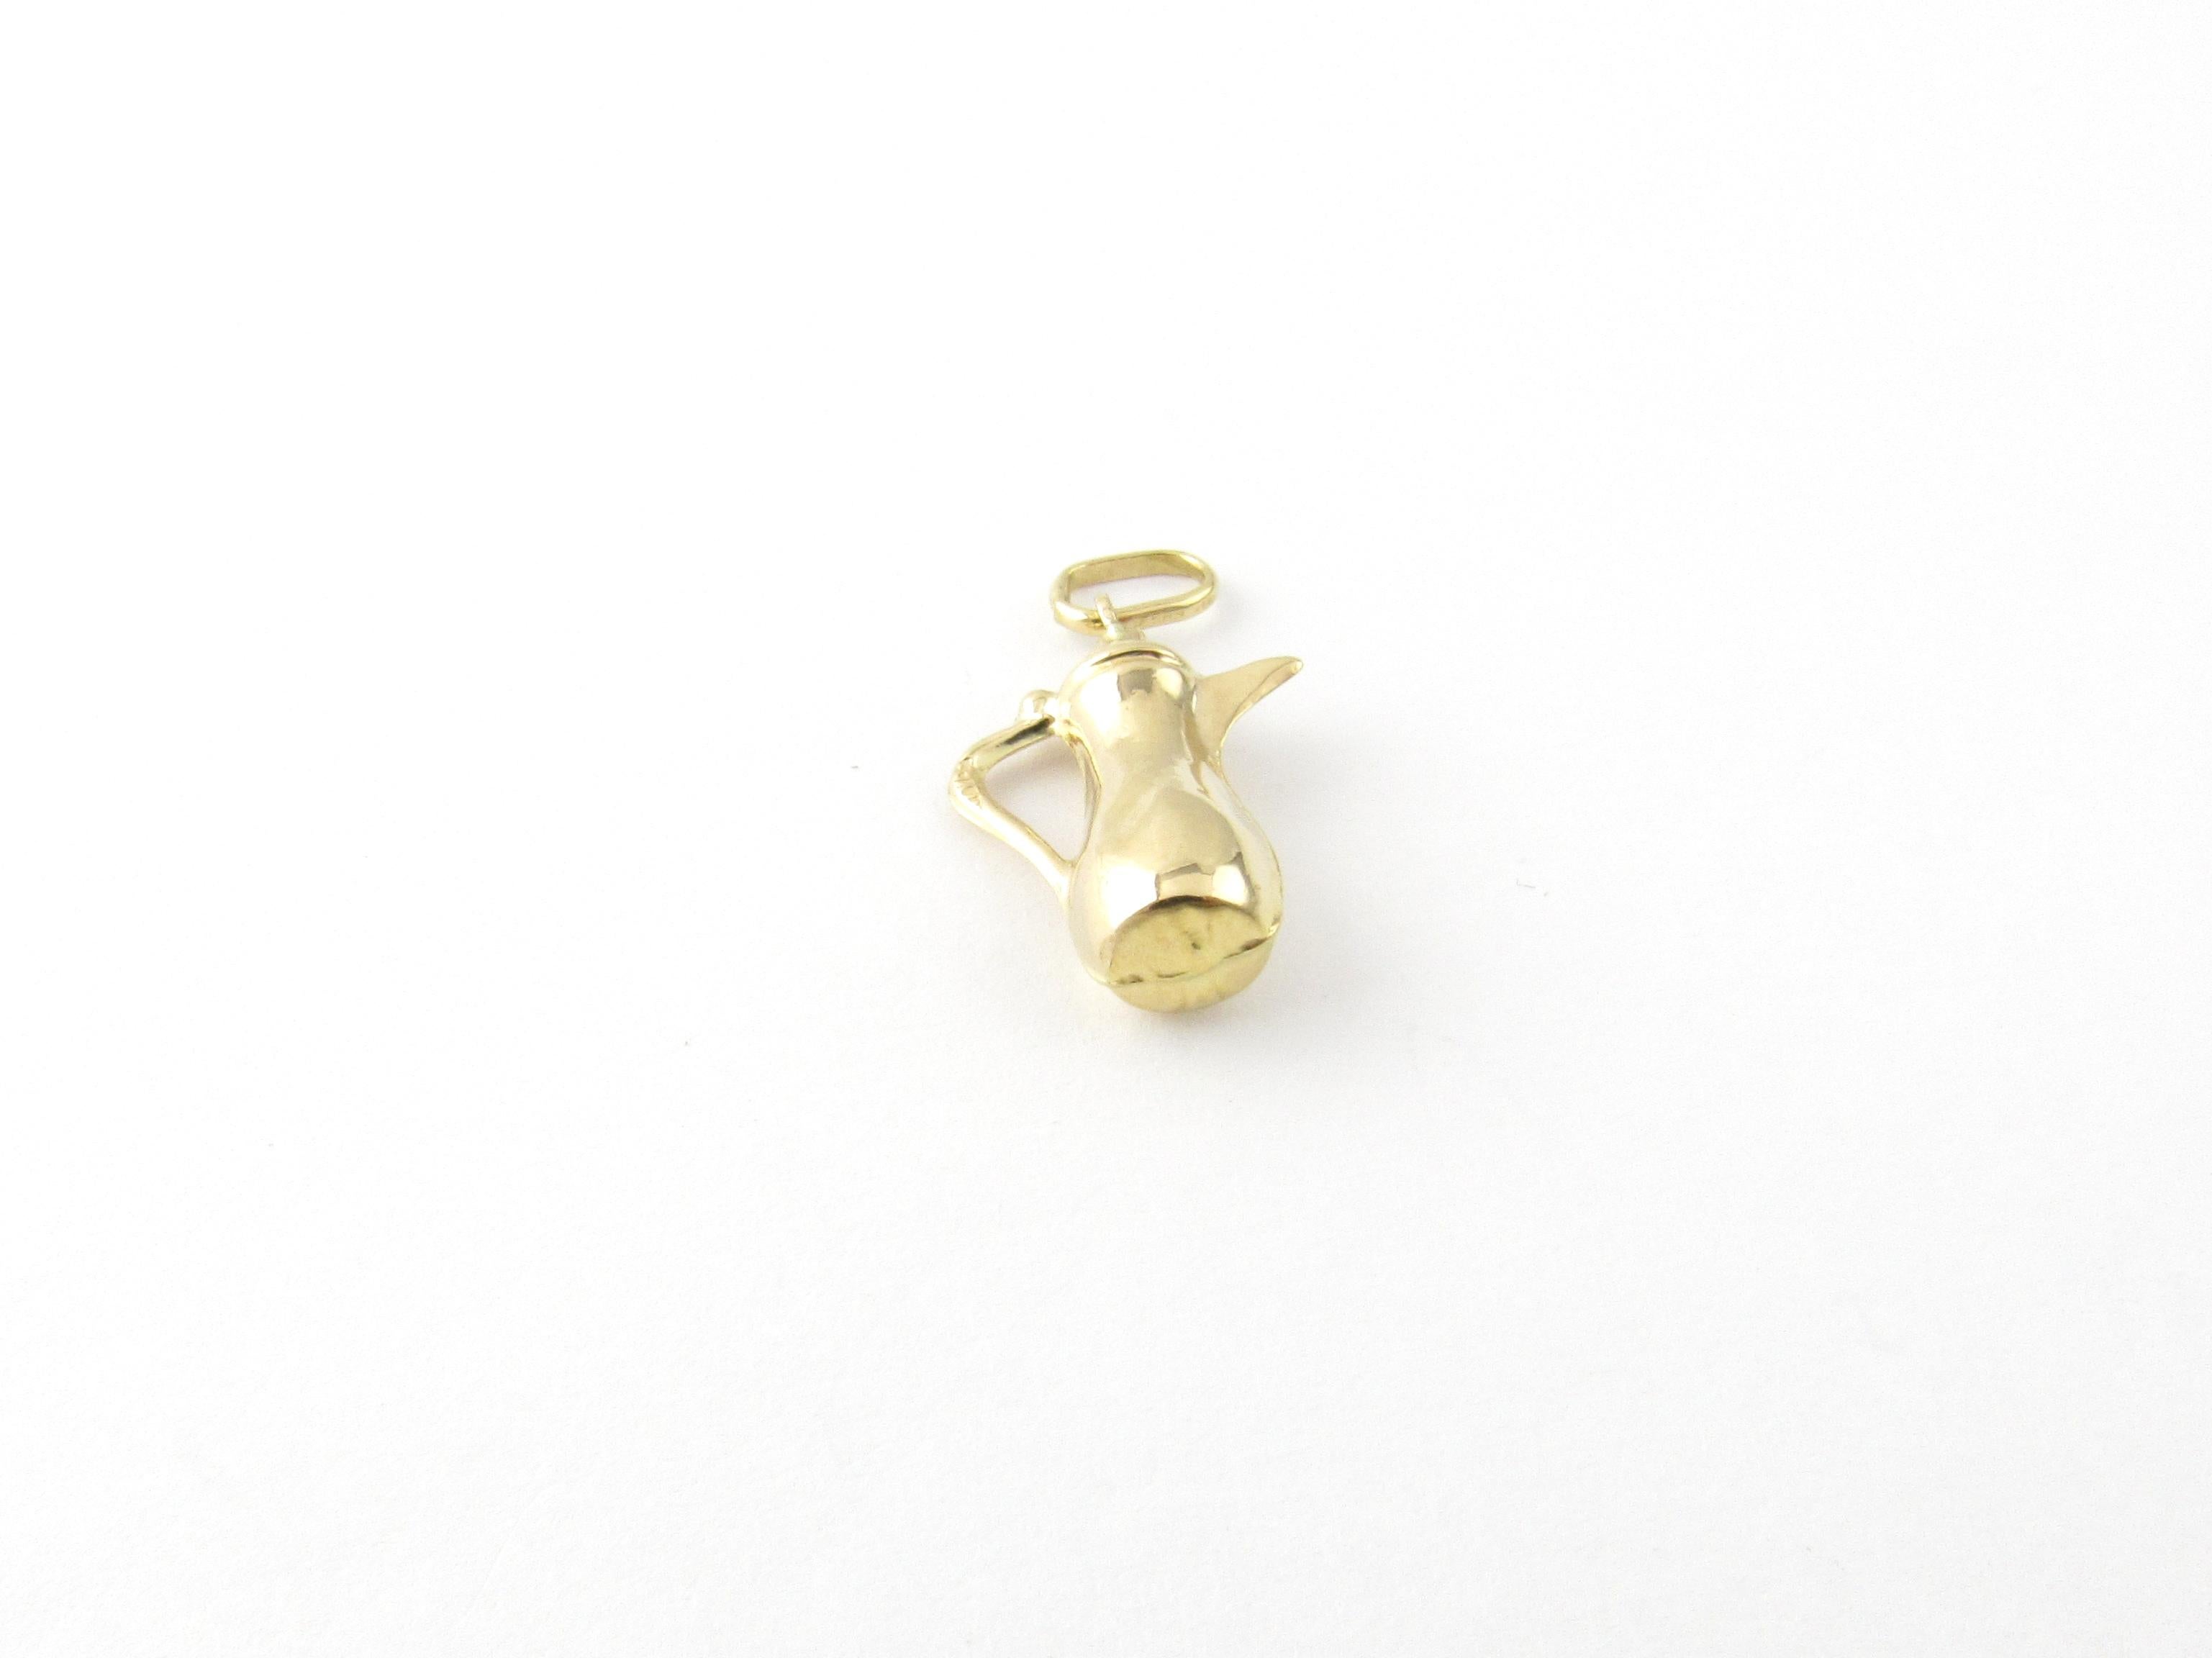 Vintage 14 Karat Yellow Gold Teapot Charm

It's teatime!

This lovely 3D charm features a miniature teapot meticulously detailed in 14K yellow gold.

Size: 21 mm x 14 mm (actual charm)

Weight: 0.5 dwt. / 0.9 gr.

Stamped: 585

Very good condition,